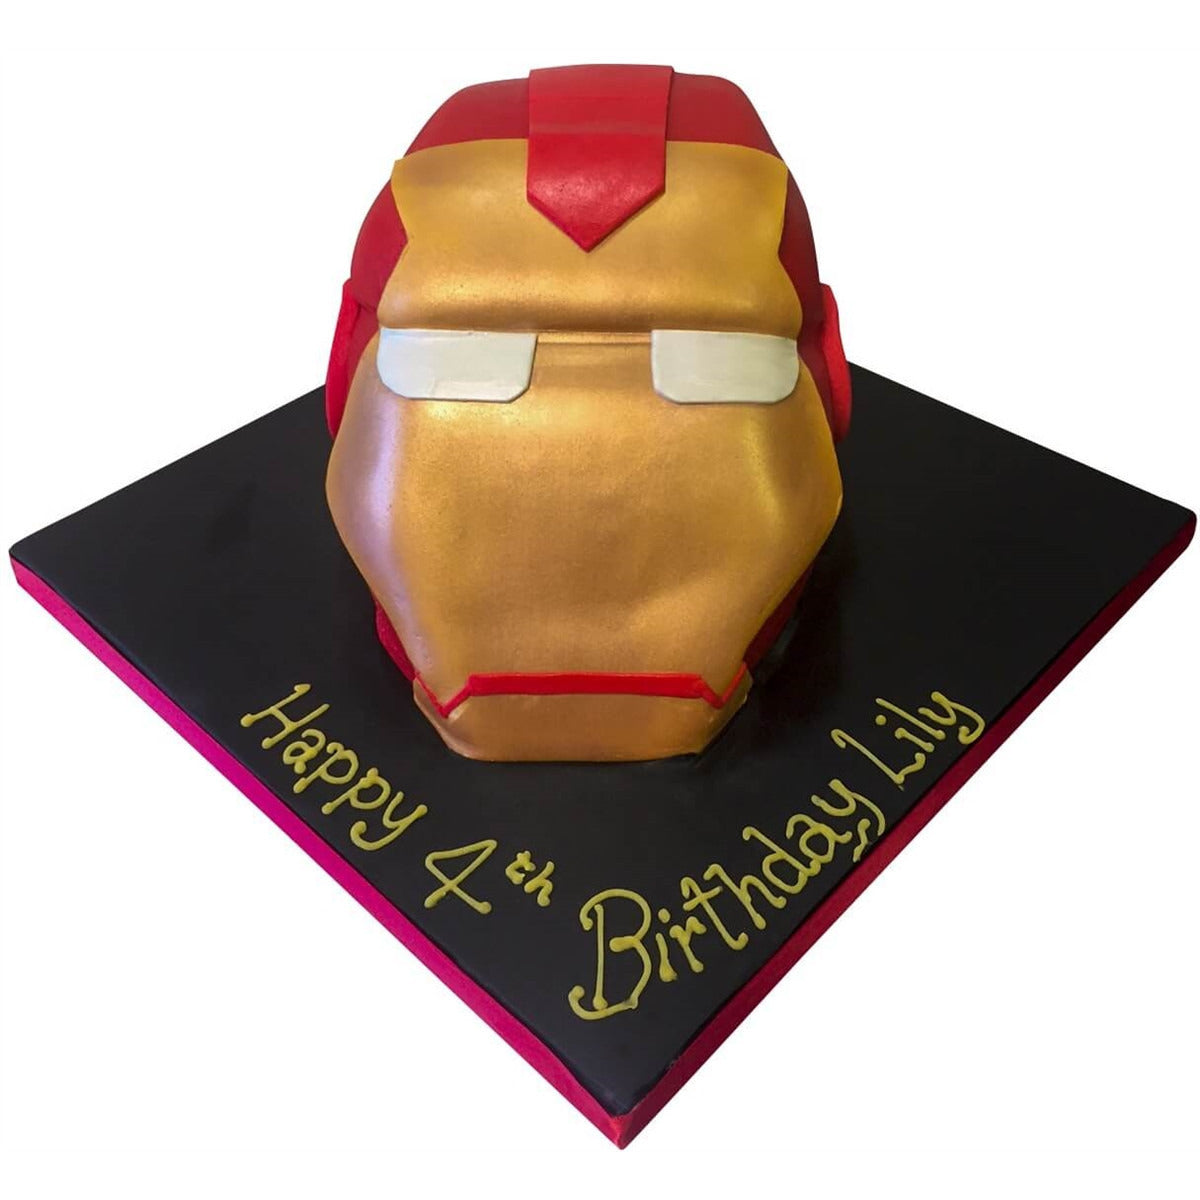 Ironman Cake - Perfect Party Ideas.com